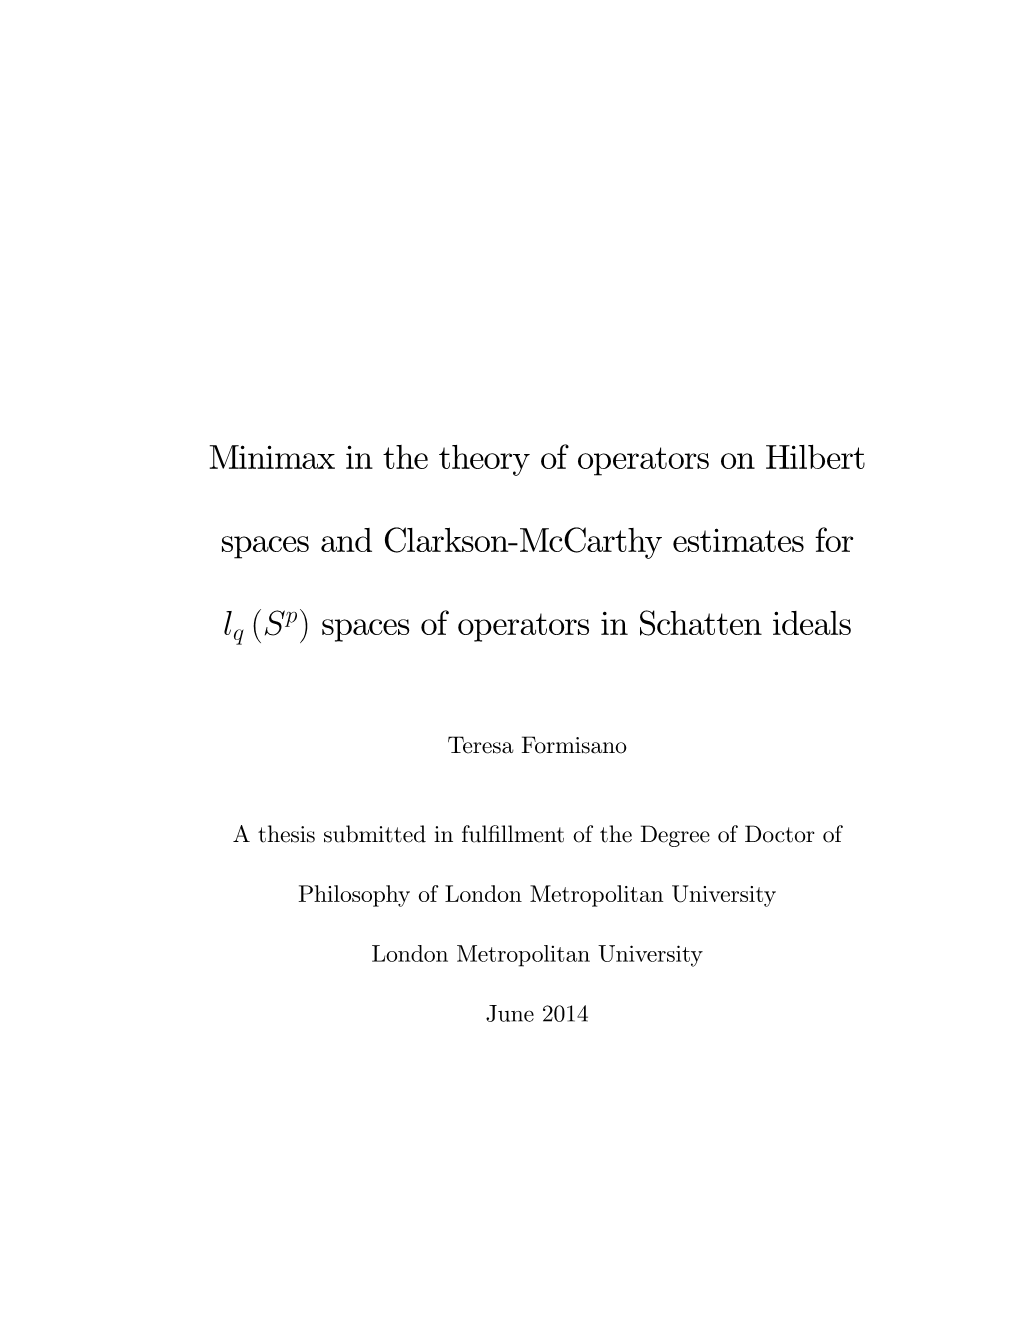 Minimax in the Theory of Operators on Hilbert Spaces and Clarkson